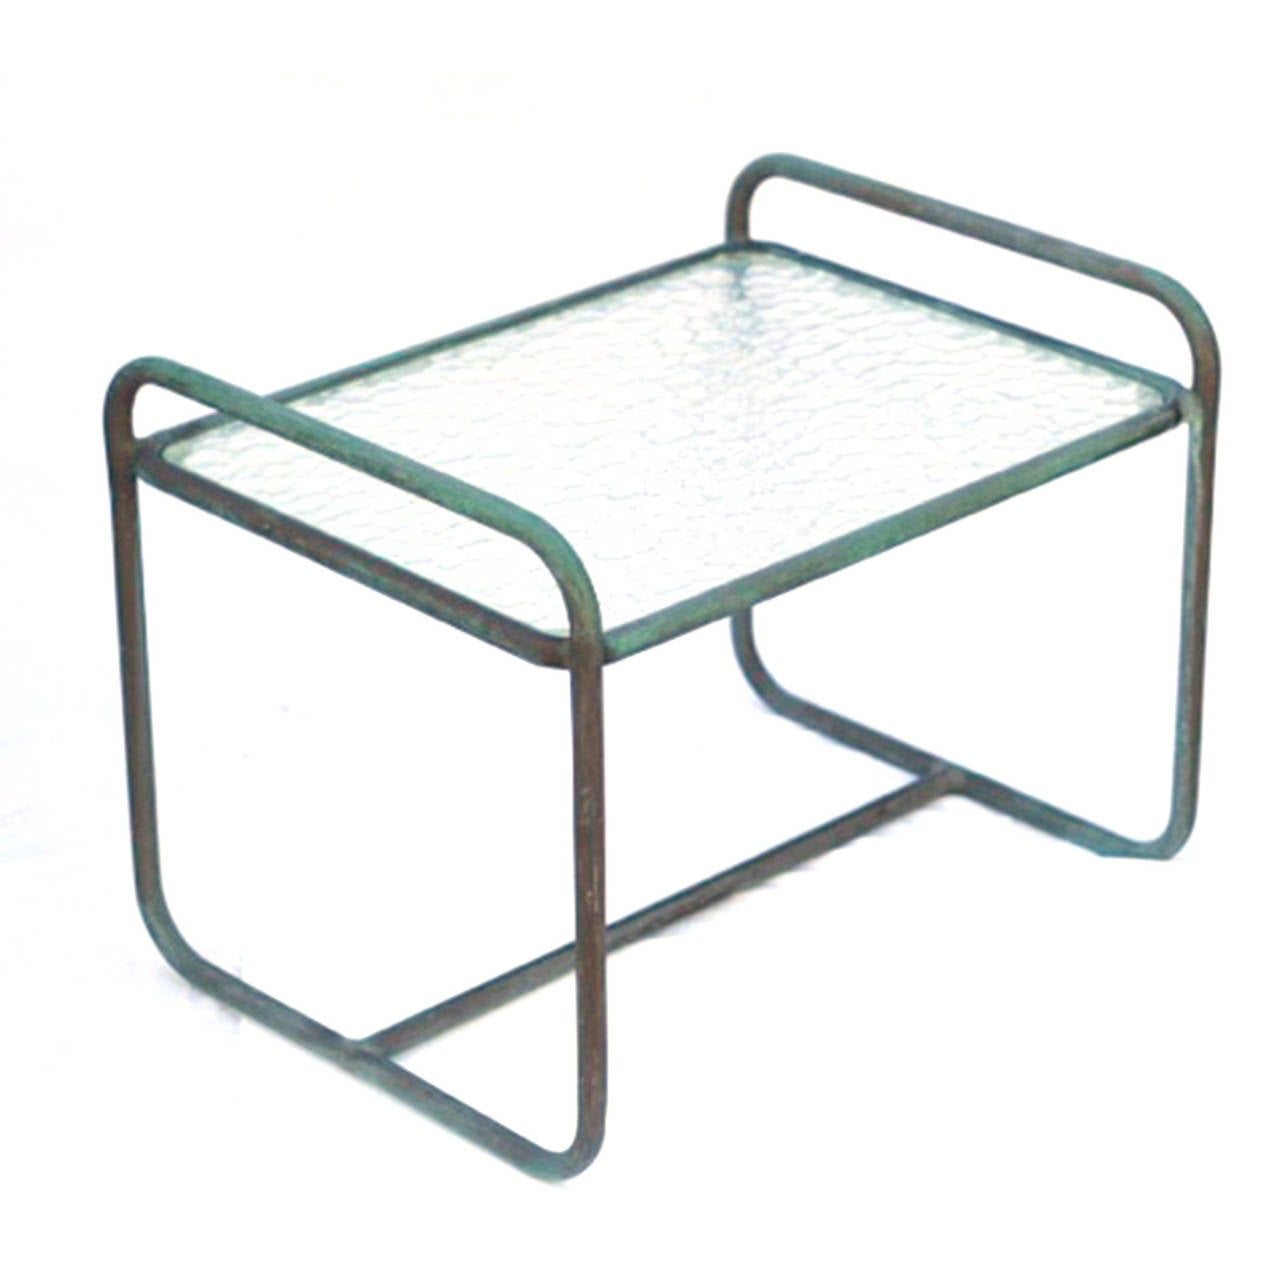 Low side table in bronze by Walter Lamb, circa 1950s. Table has a lovely green patina with a plastic insert. Glass can be replaced for minimal cost. 

We have an extensive Walter Lamb collection. Email for details.